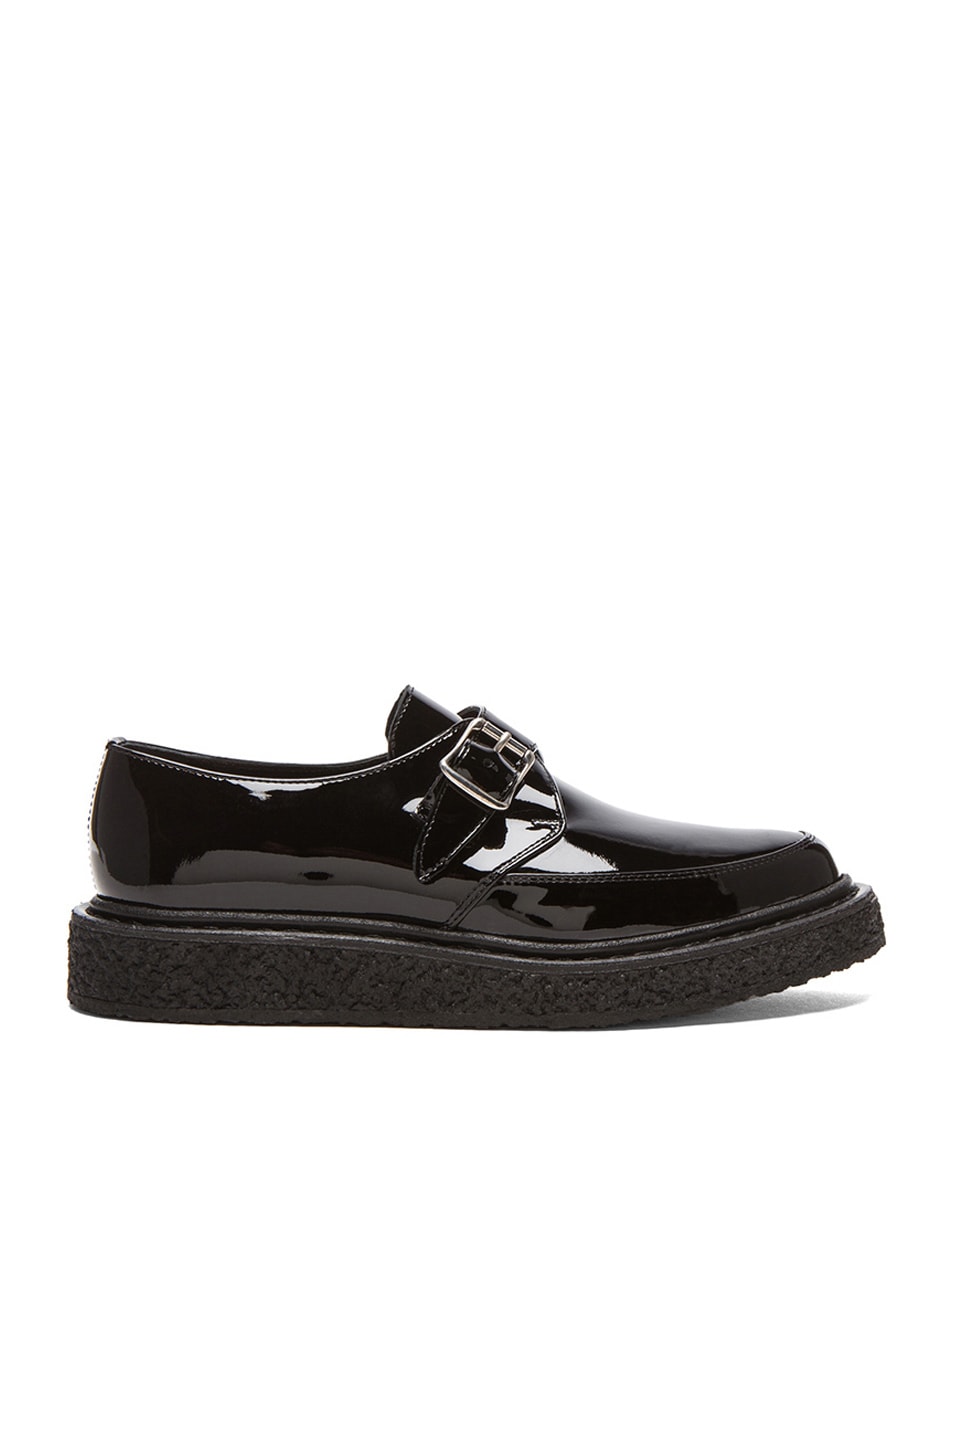 Image 1 of Saint Laurent Patent Leather Creepers in Black